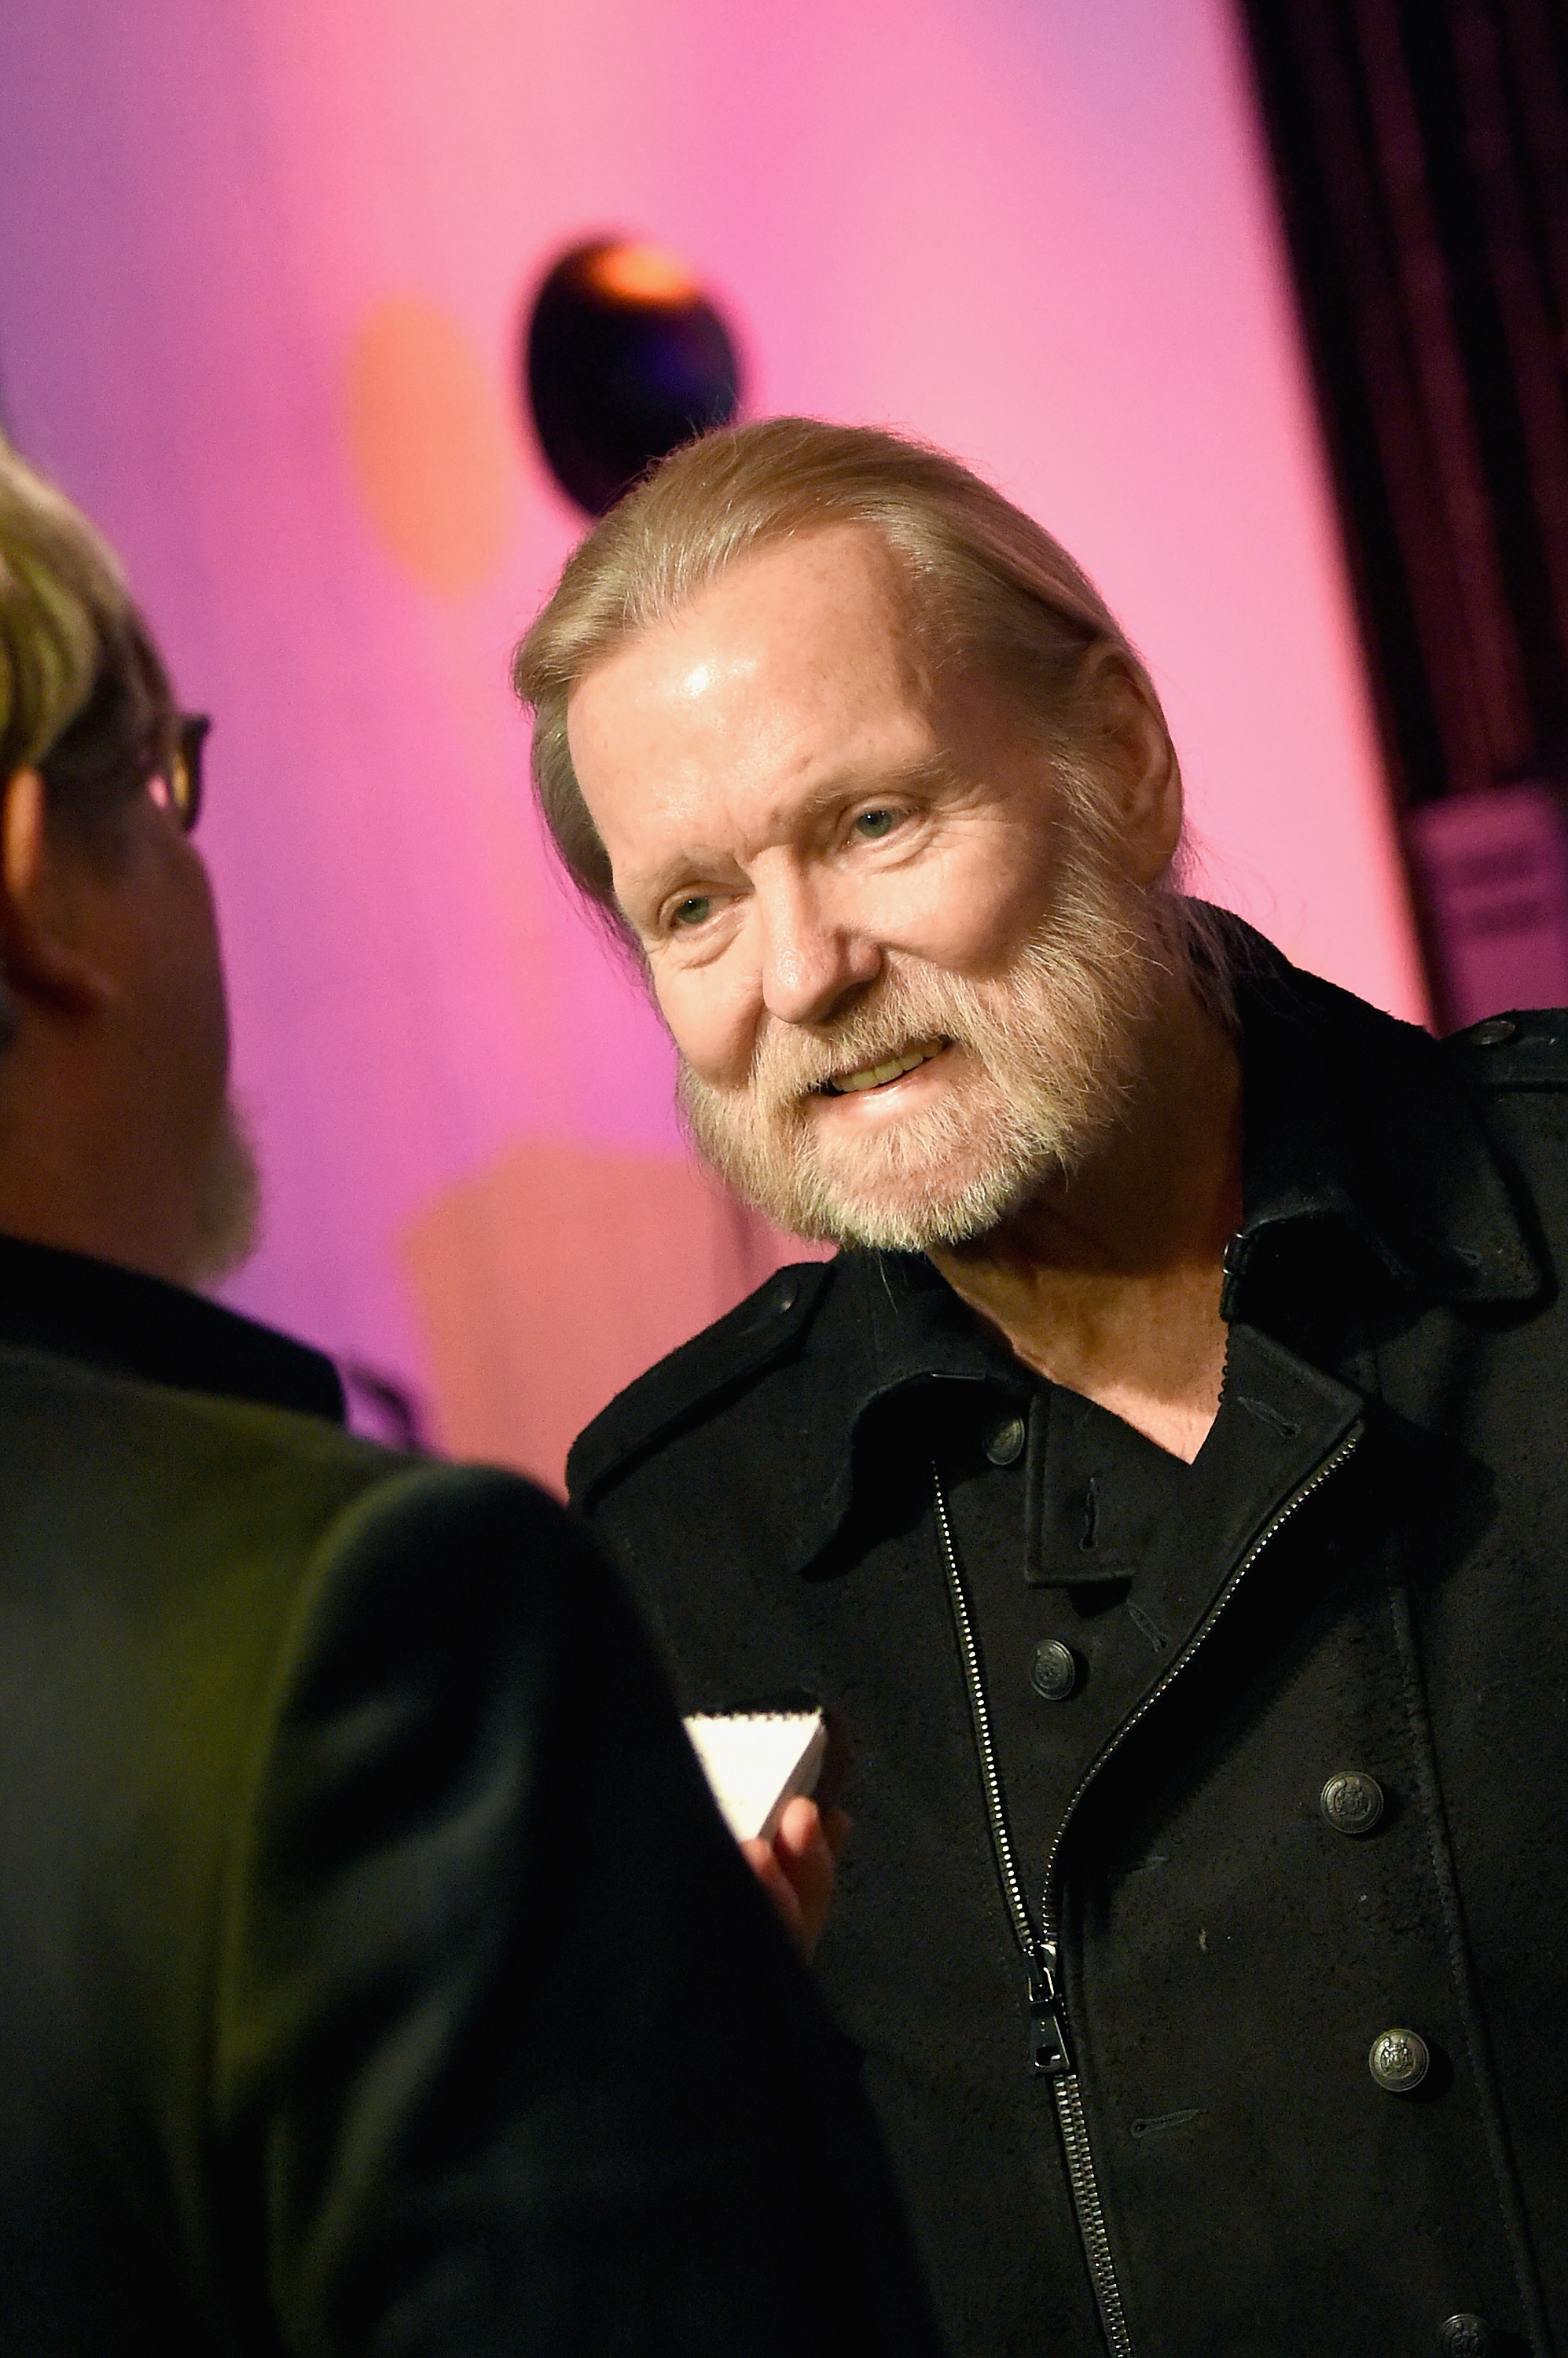 Gregg Allman speaks to the press before the Skyville Live & USA TODAY Presents A Salute to Gregg Allman in Nashville, Tennessee, on December 11, 2015. | Source: Getty Images